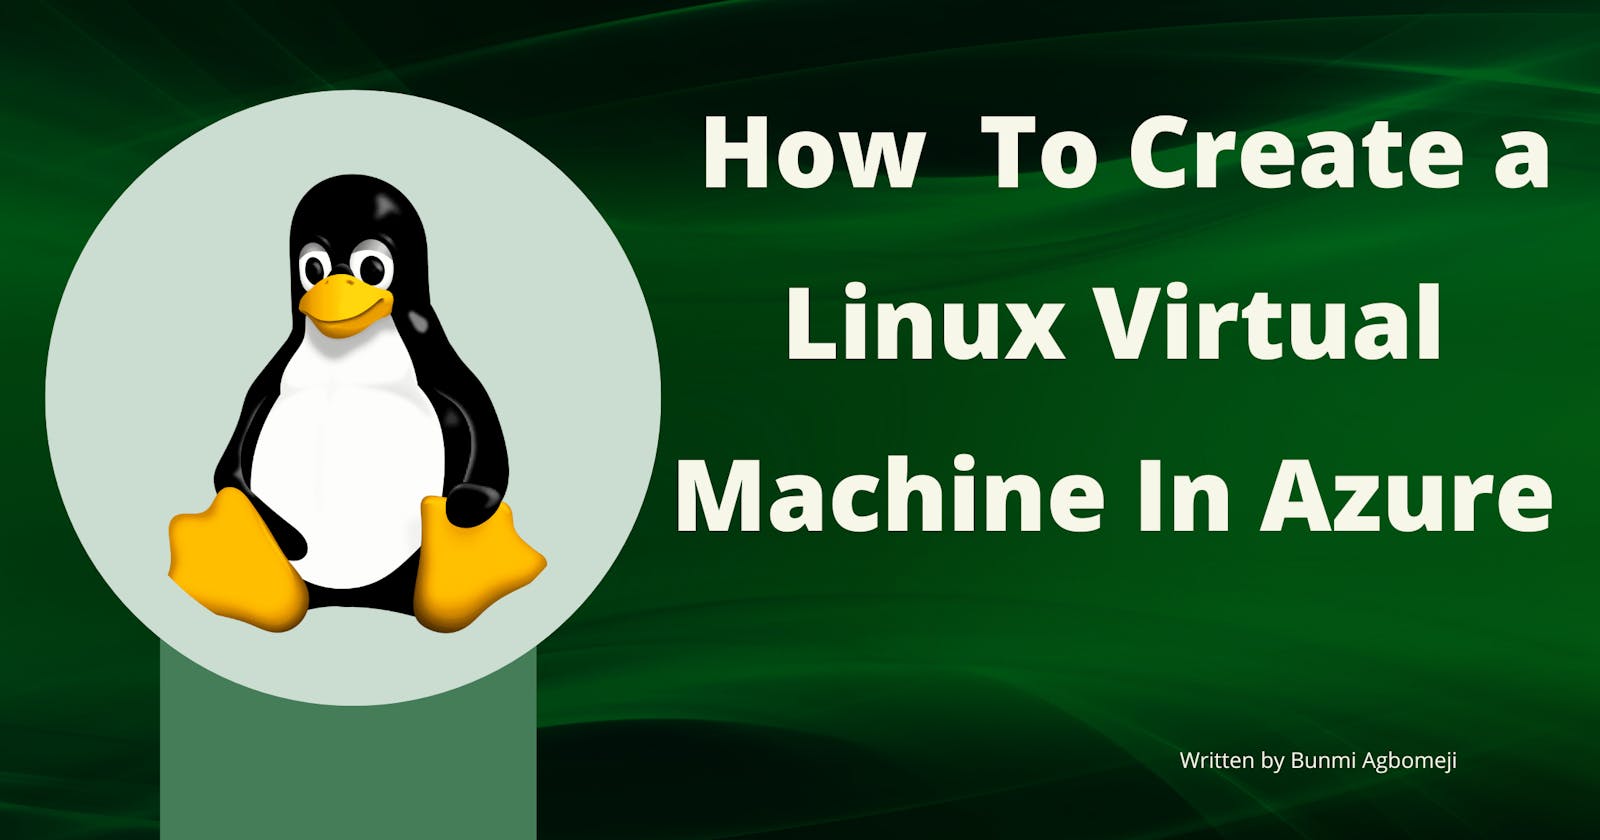 How To Create a Linux Virtual Machine In Azure